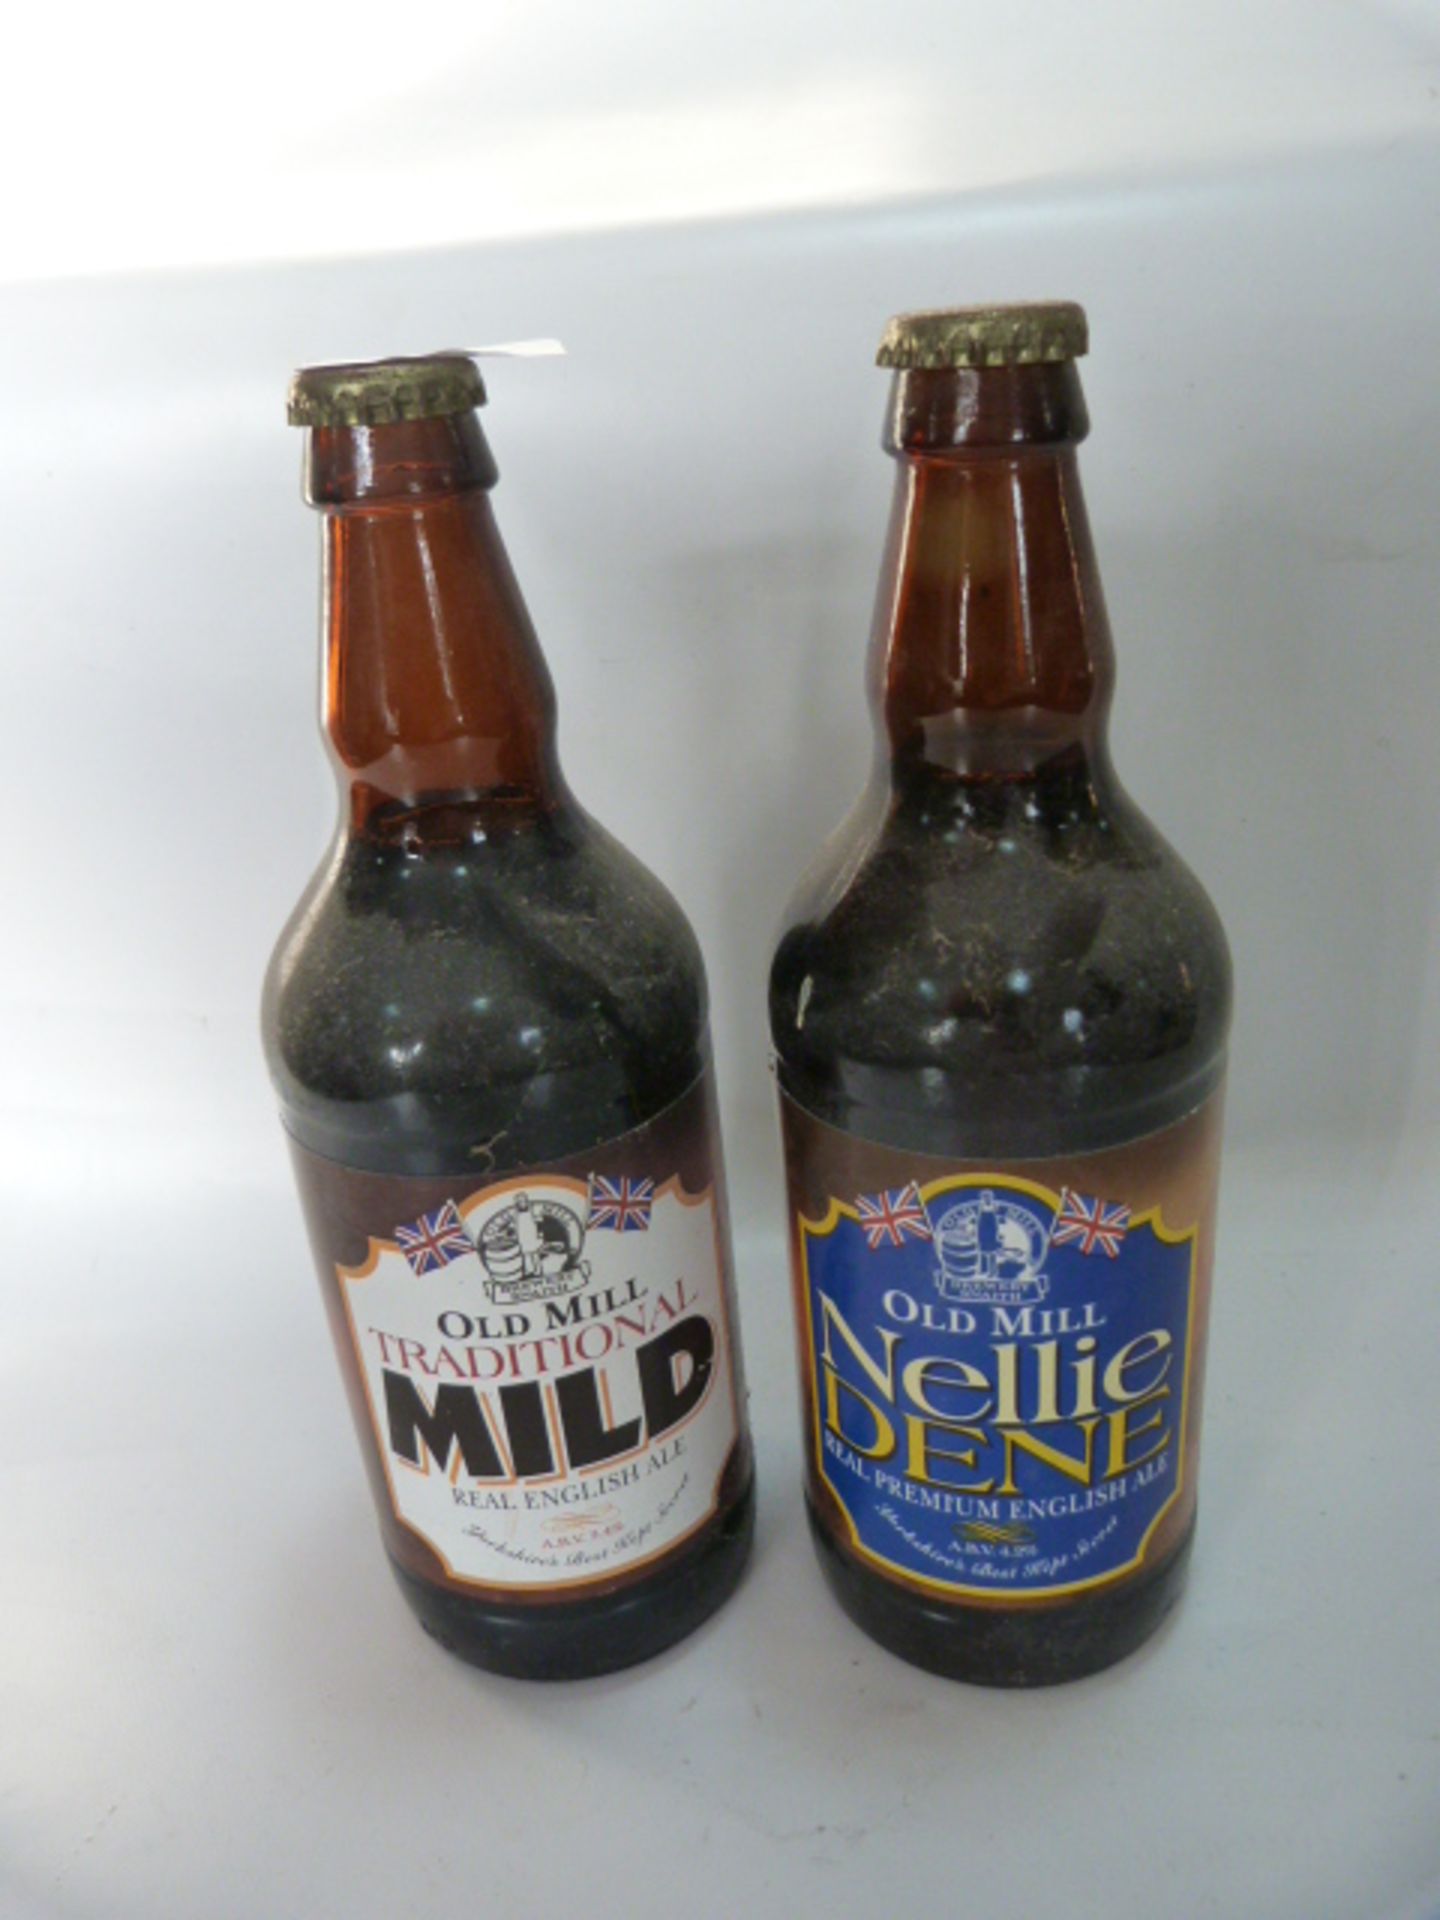 Two Bottles of Old Mill Nellie Dean and Traditional Mild English Ale 500ml